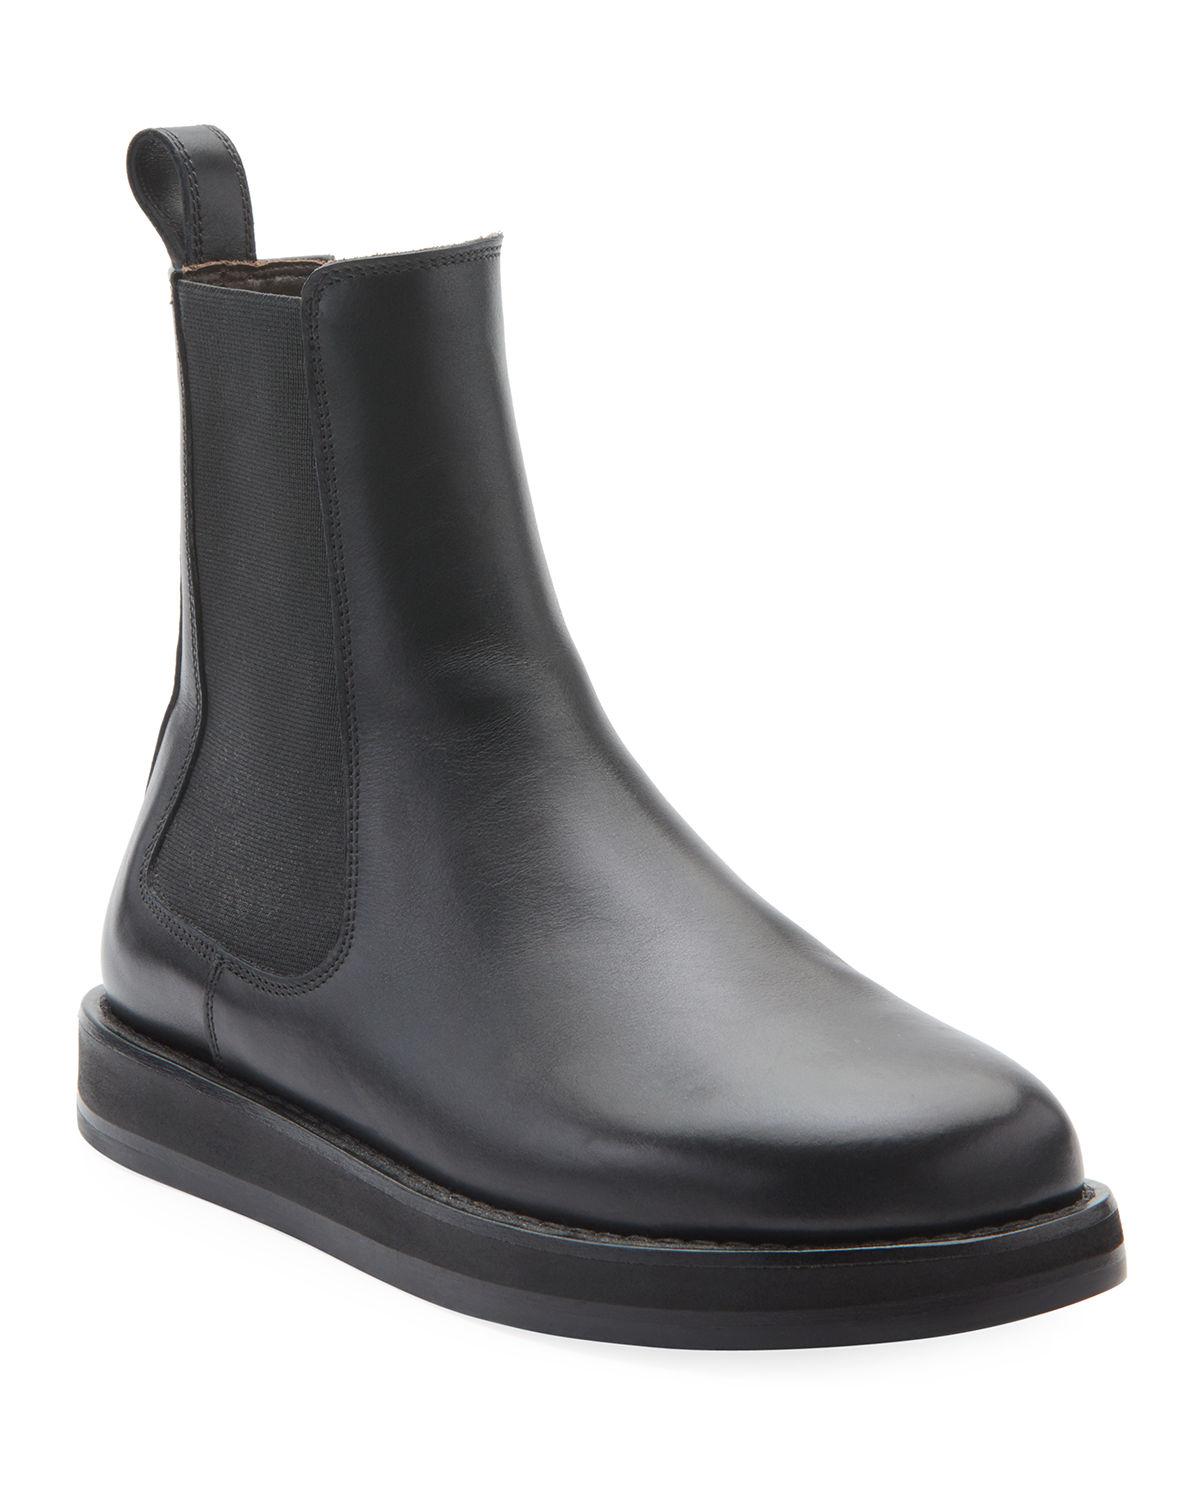 The Row Gaia Leather Gored Boots in Black | Lyst